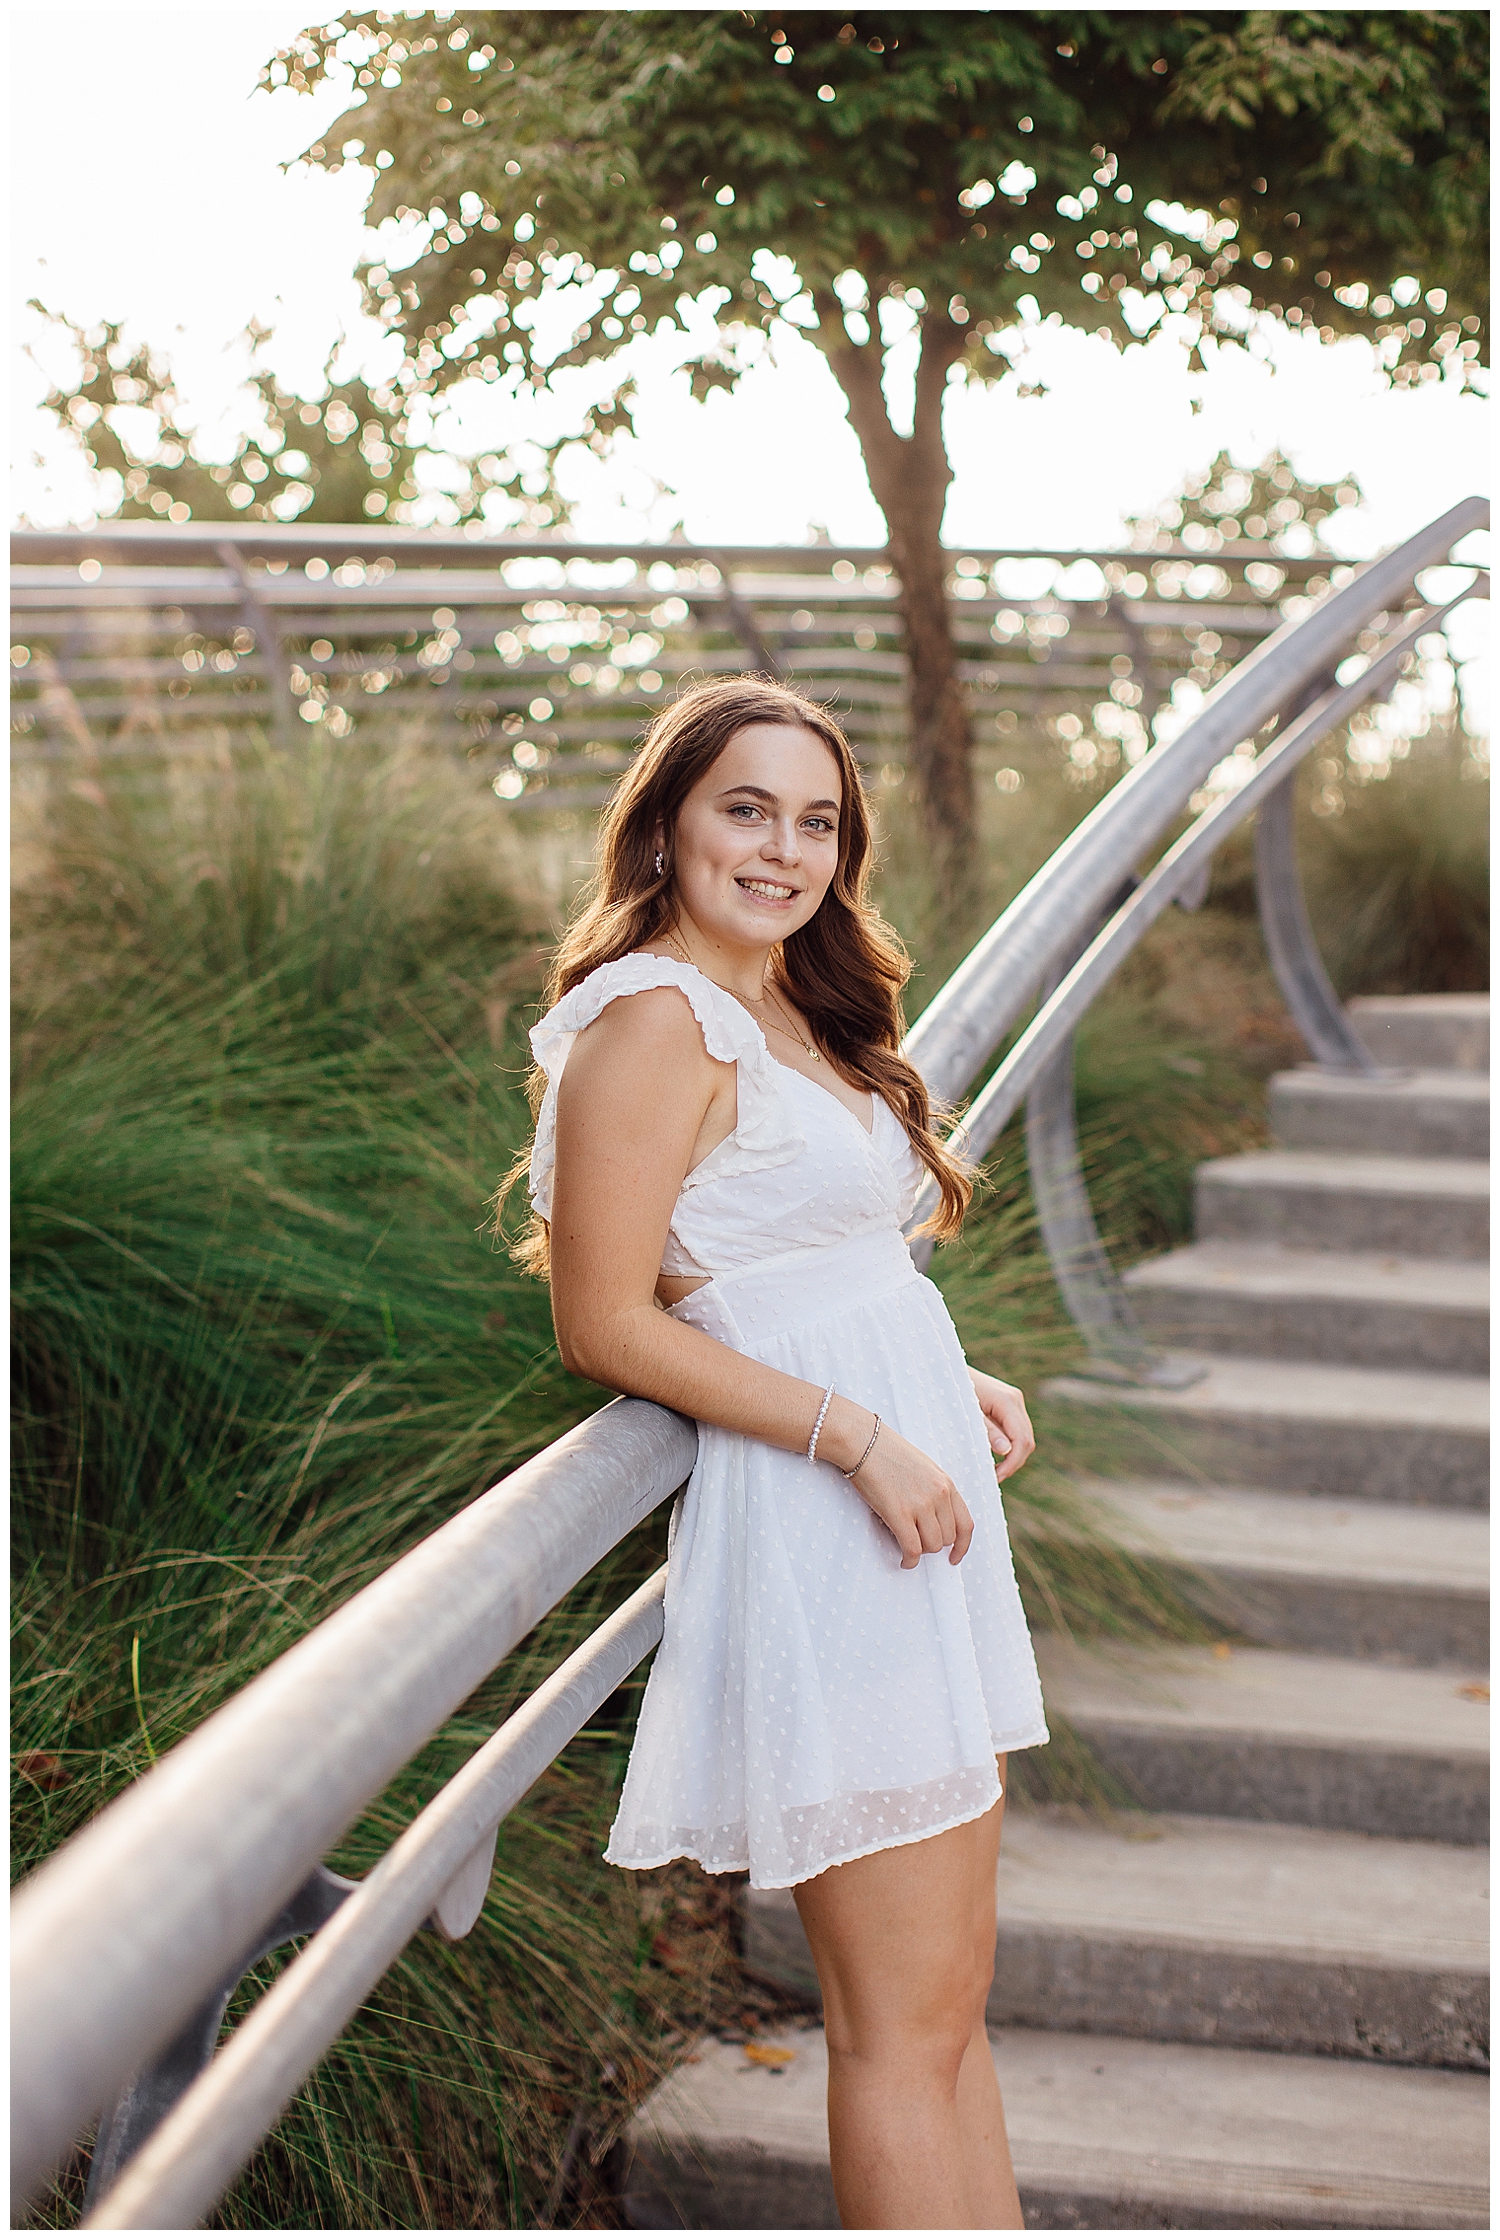 Houston outdoor senior photos at Sabine street park with girl in white dress leaning on rail